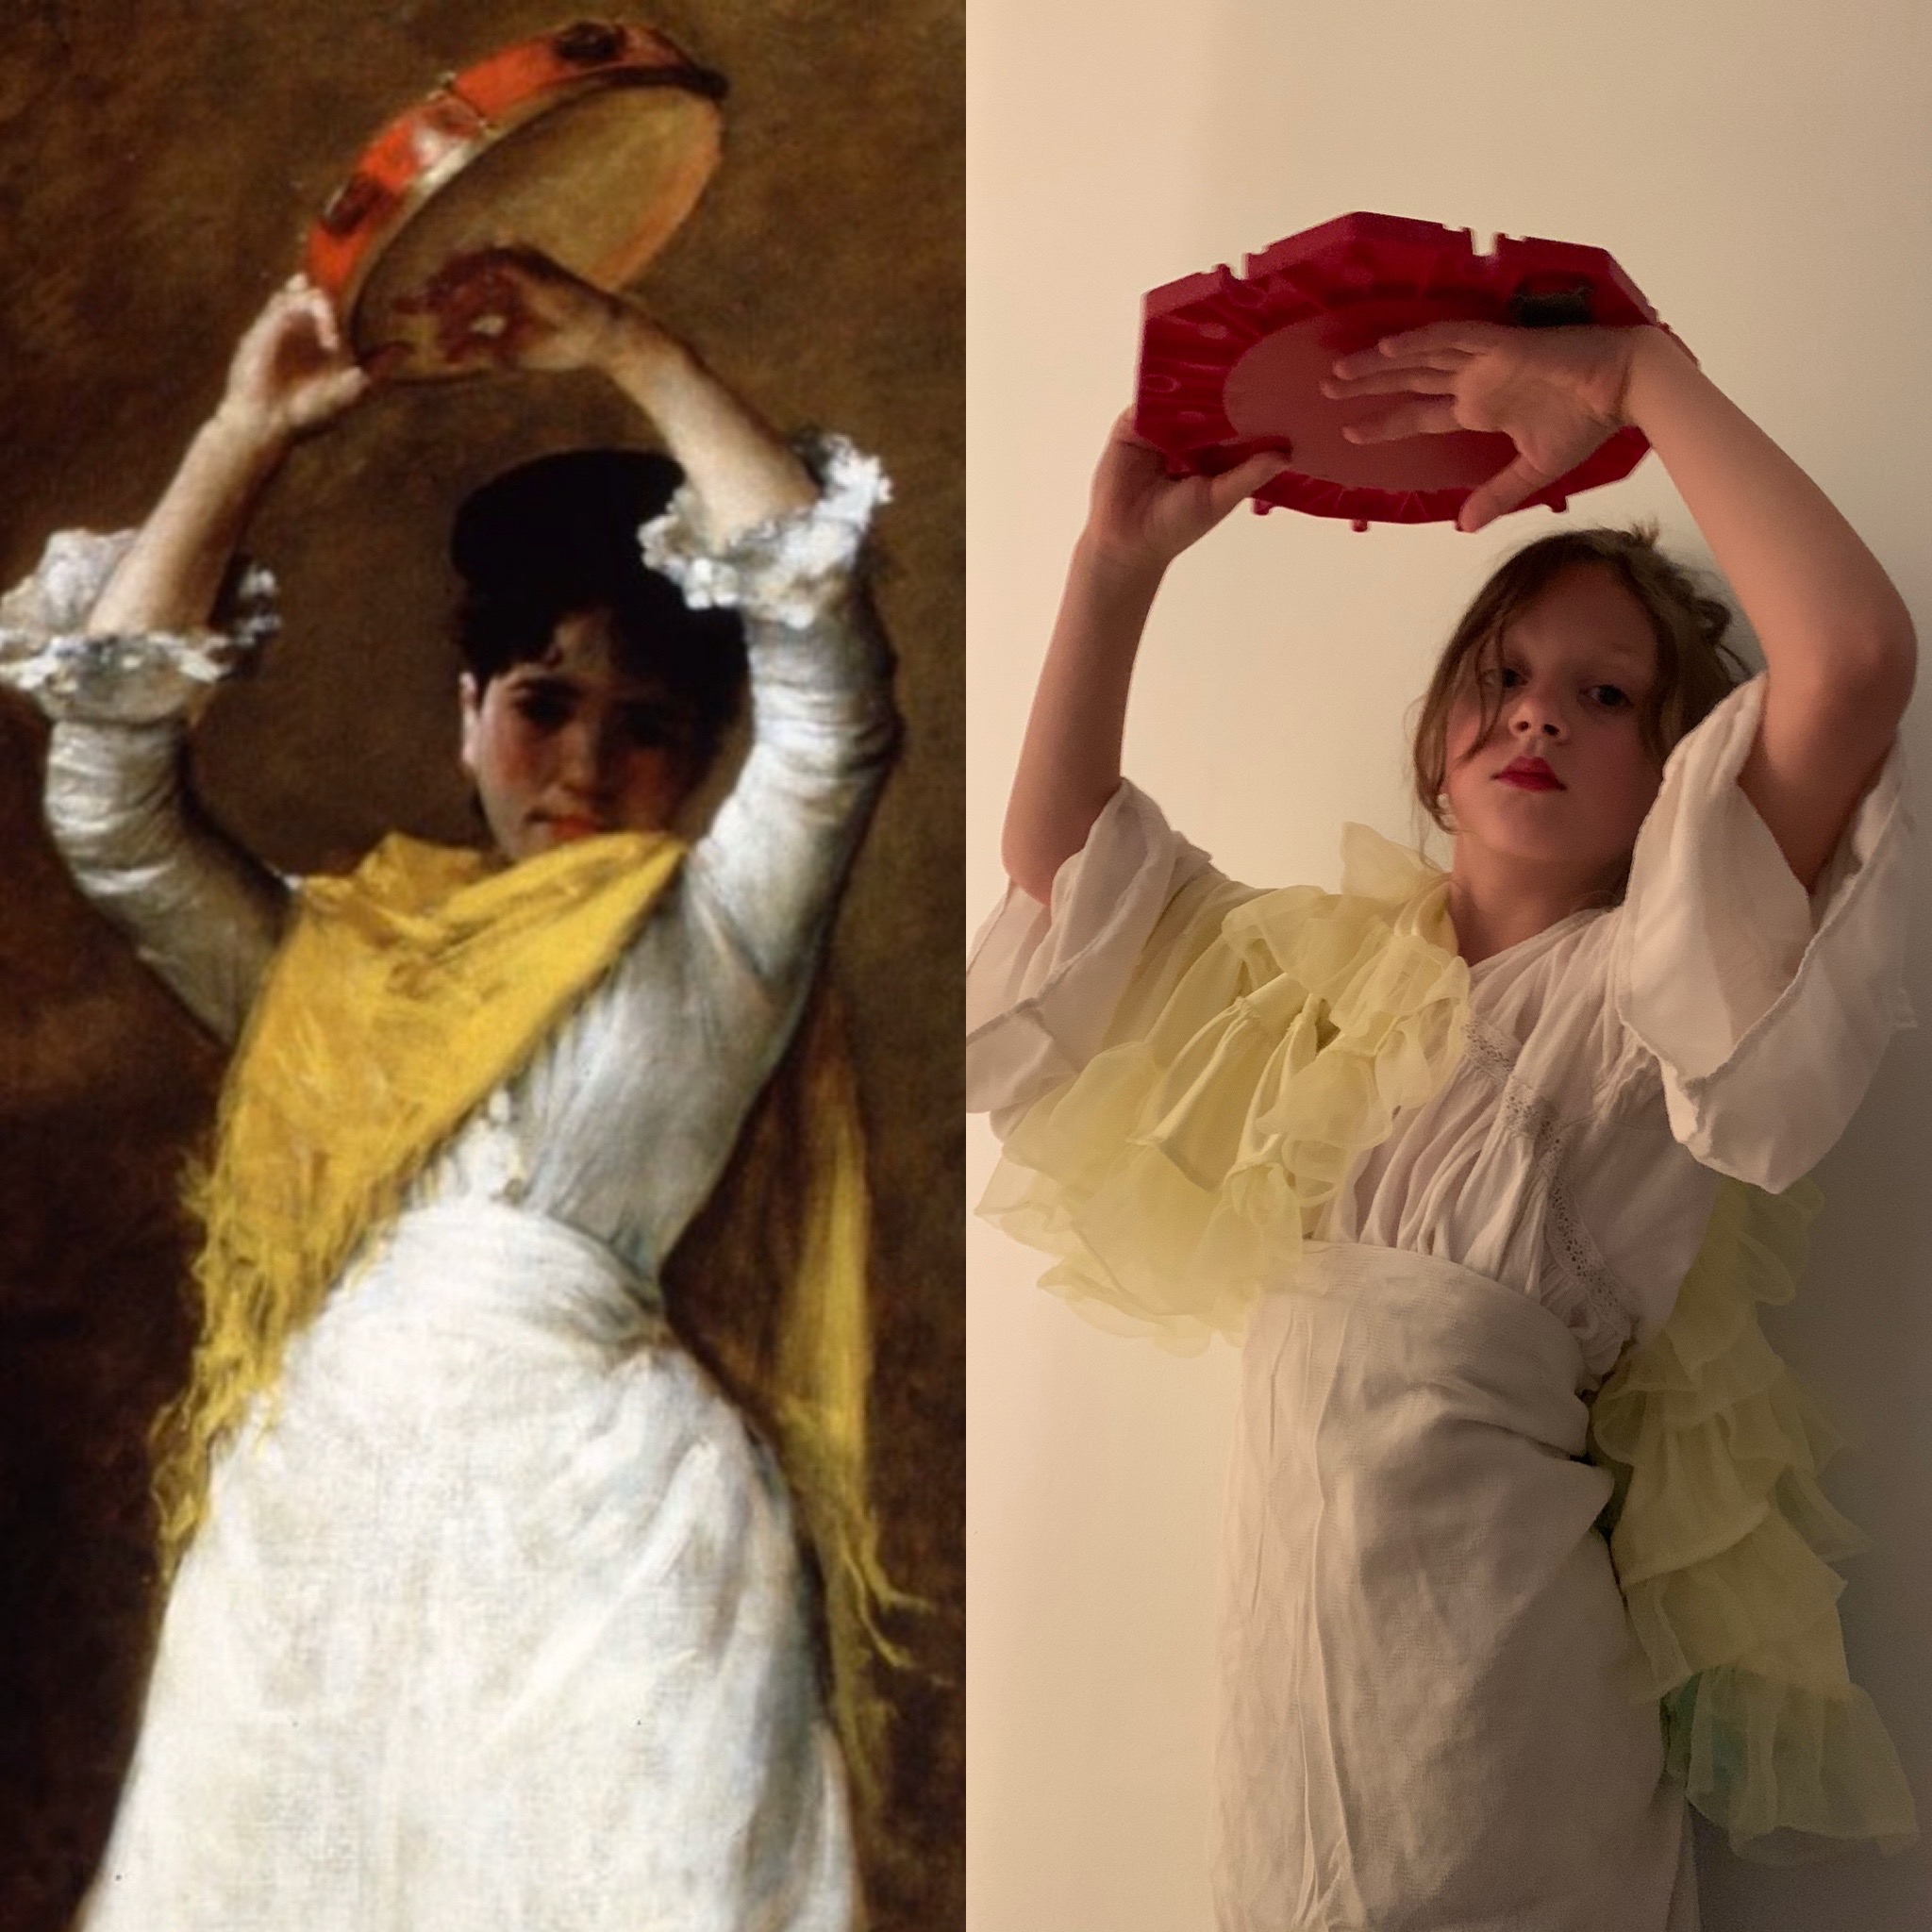 william merrit chase's artwork the tambourine girl on the left is compared to a recreation on the right. this is part of the Between art and quarantine challenge. 